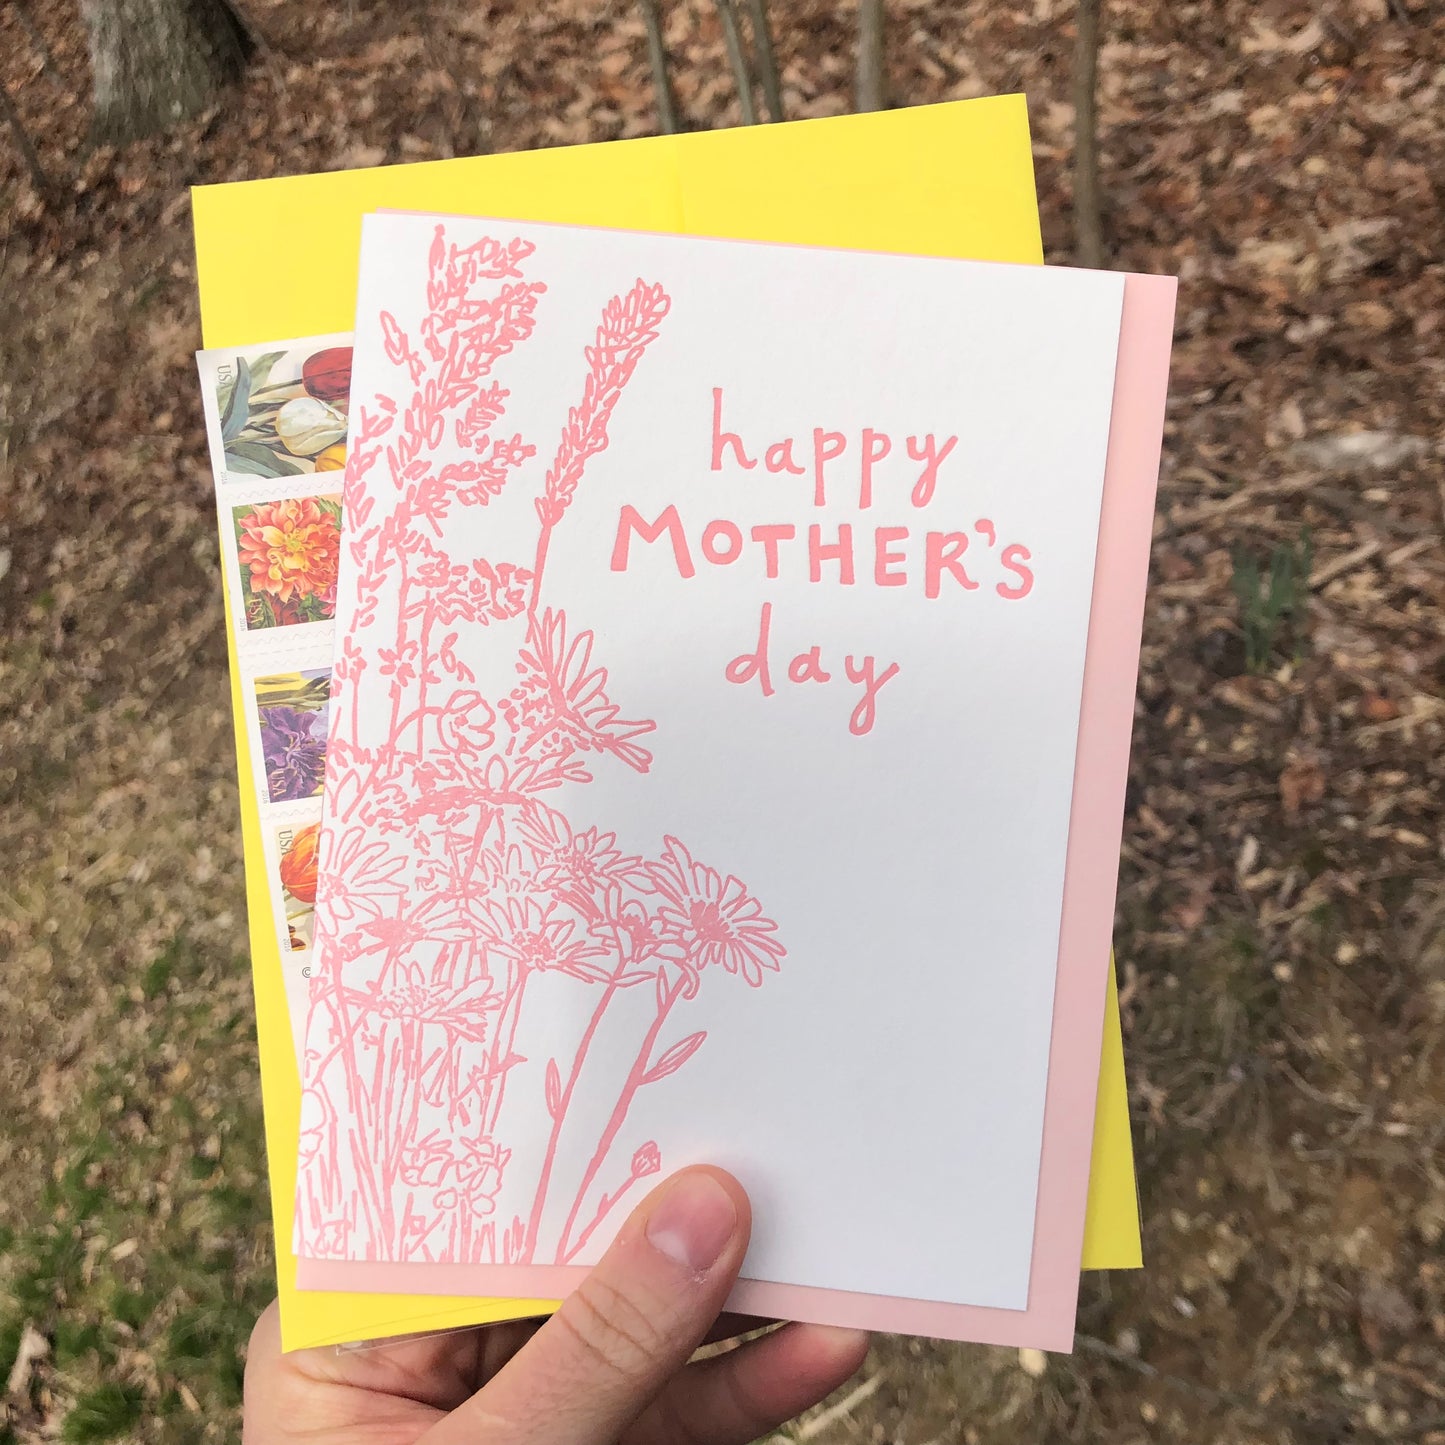 Letterpress greeting card featuring a hand-drawn  wildflower bouquet, printed in a vibrant pink ink. The top center of the card says "Happy Mother's Day" in a whimsical hand-drawn text, in the same pink ink. The card is white, blank inside, and is paired with a light pink envelope.